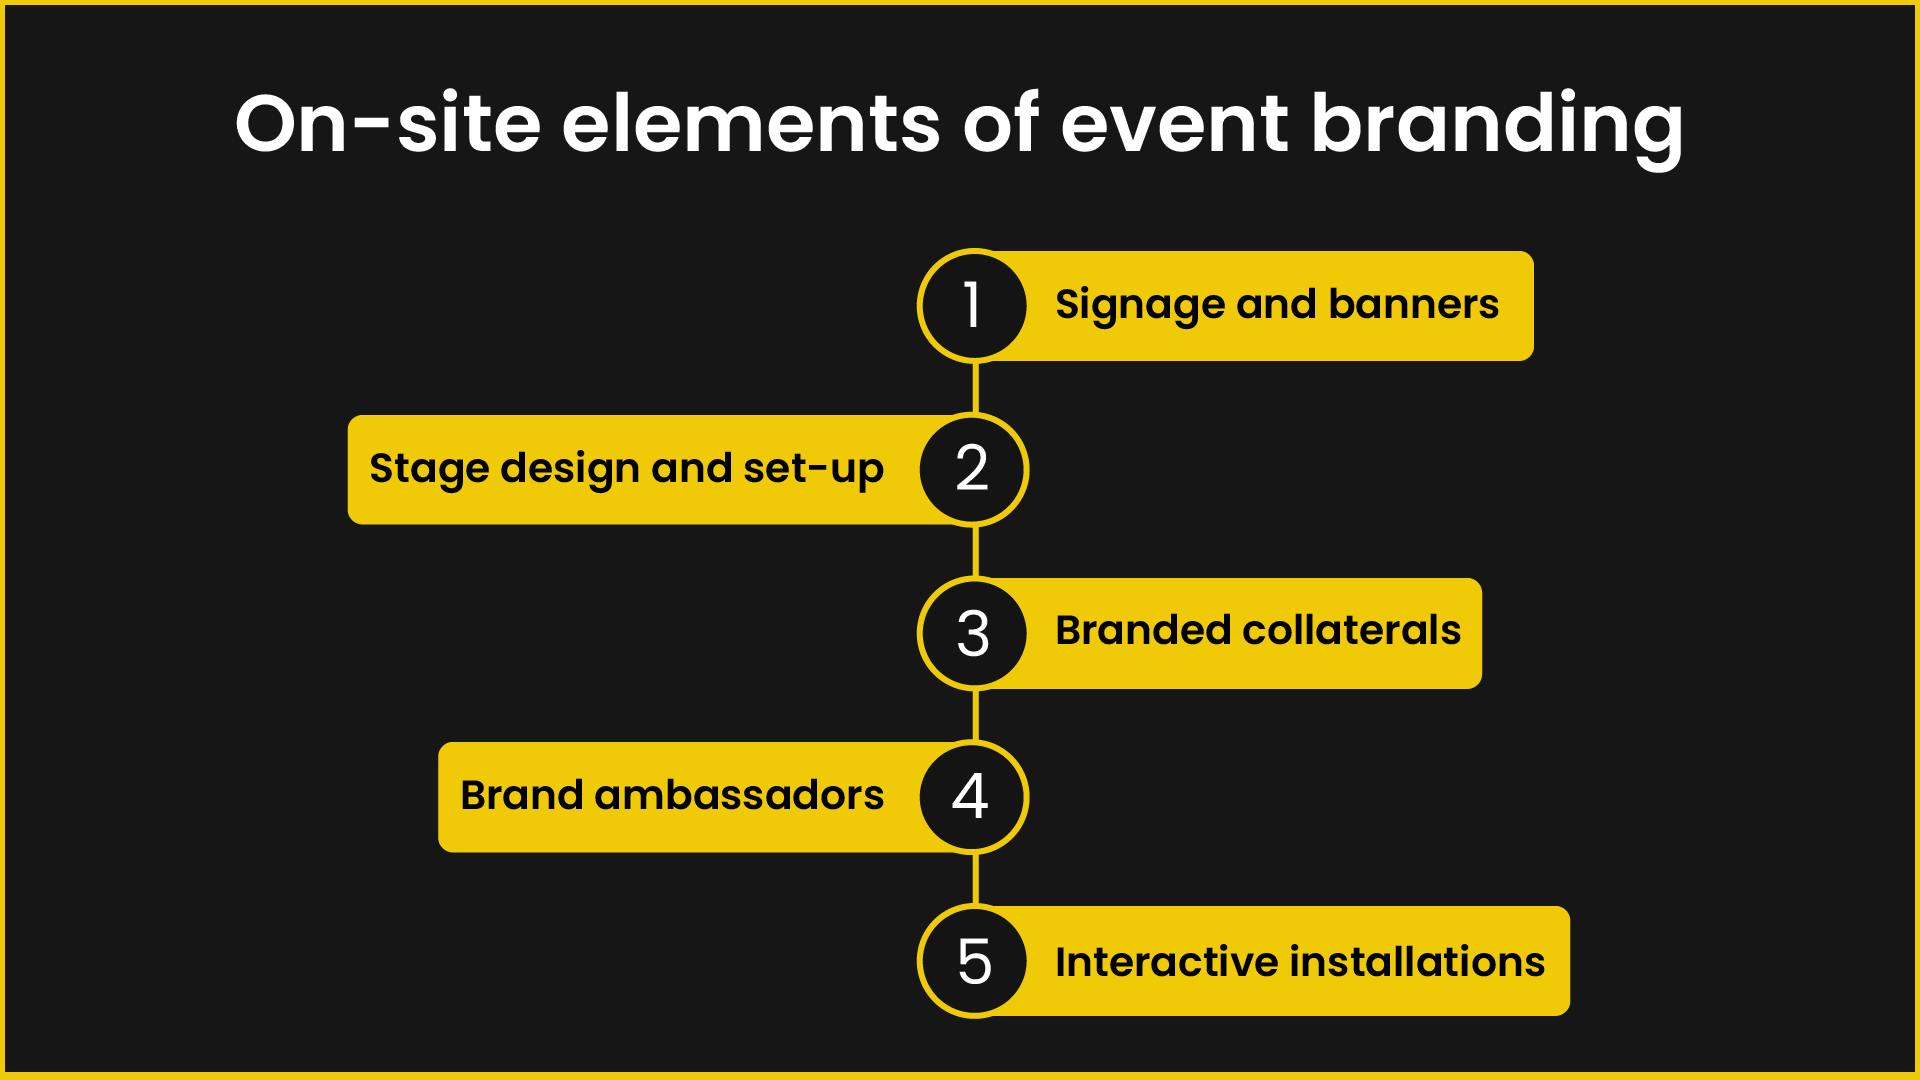 On-site elements of event branding